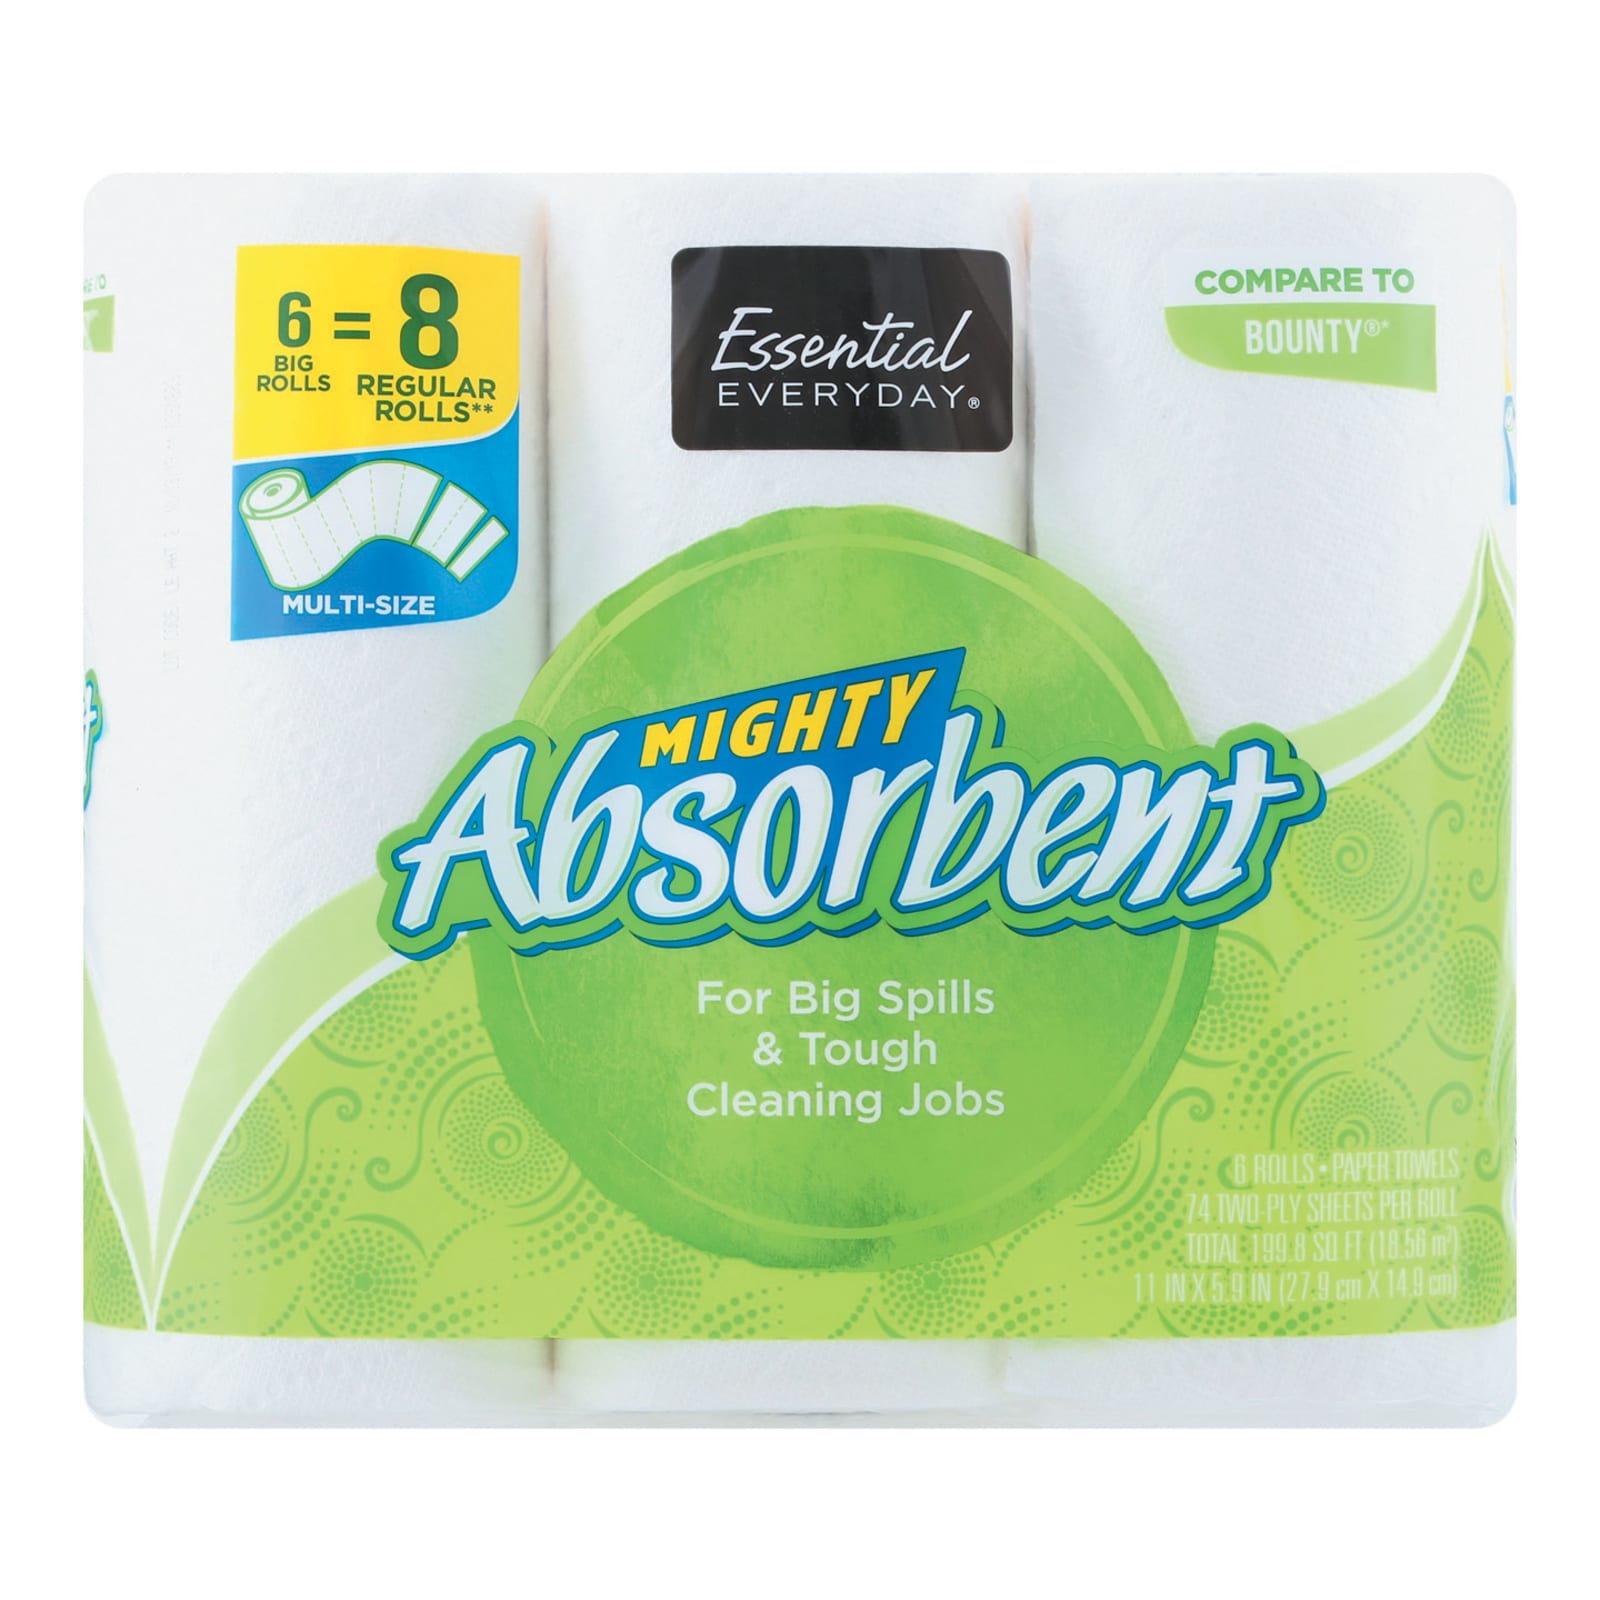 Mighty Absorbent Paper towel - 6 pk by Essential EVERYDAY at Fleet